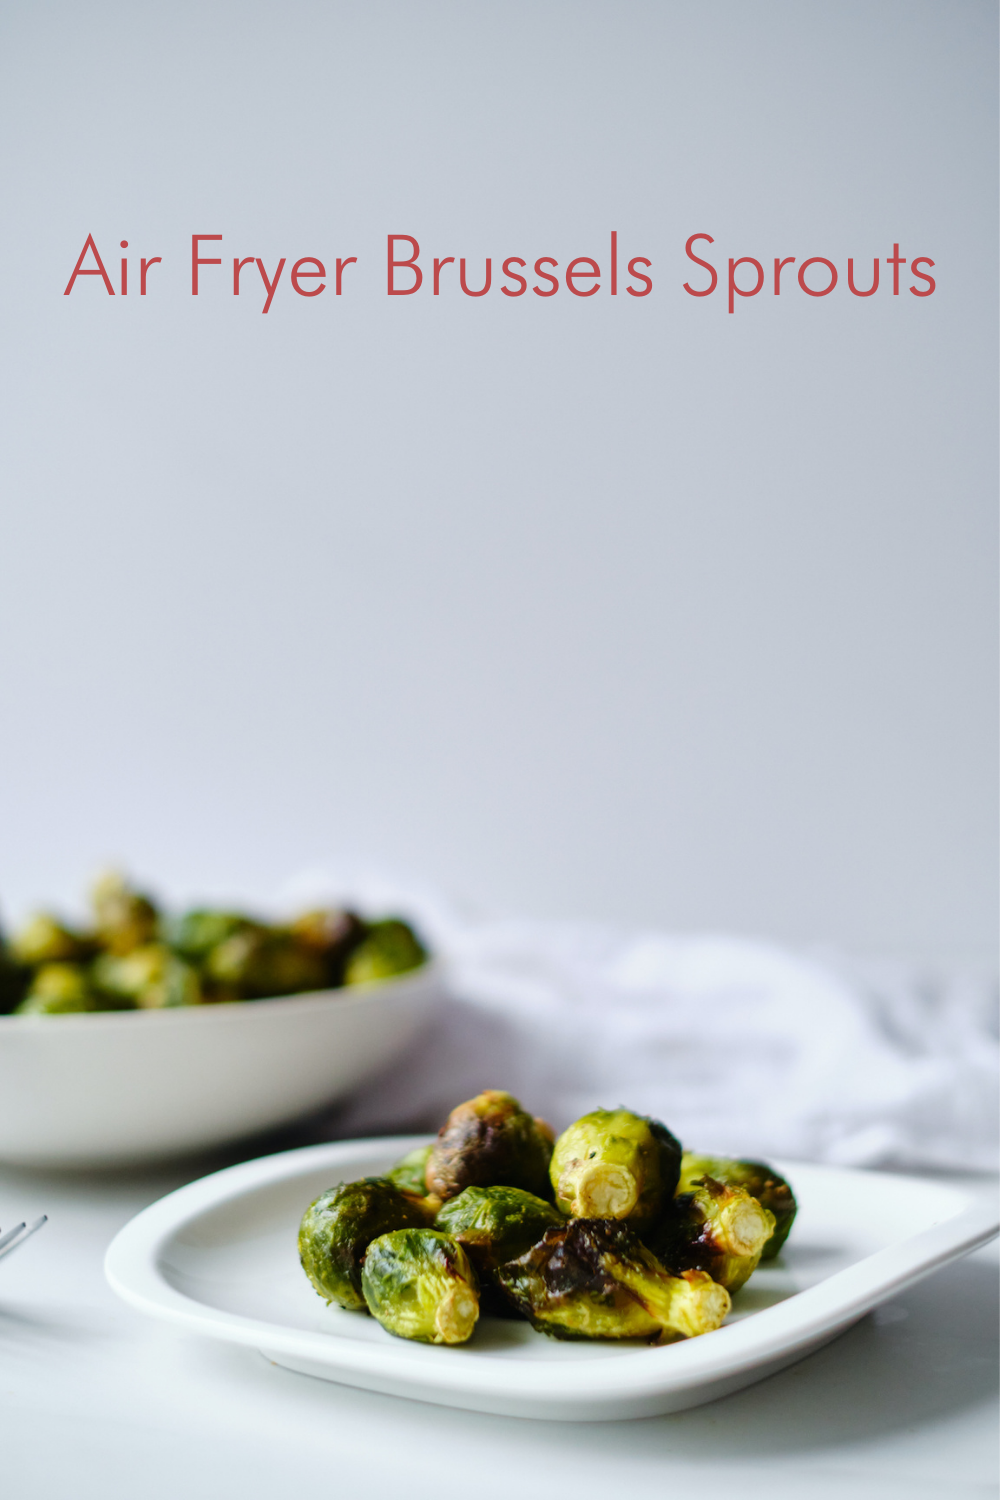 No bells and whistles needed with this simple, delicious Air Fryer Brussels Sprouts recipe. You get crispy and perfectly golden brown sprouts every time!